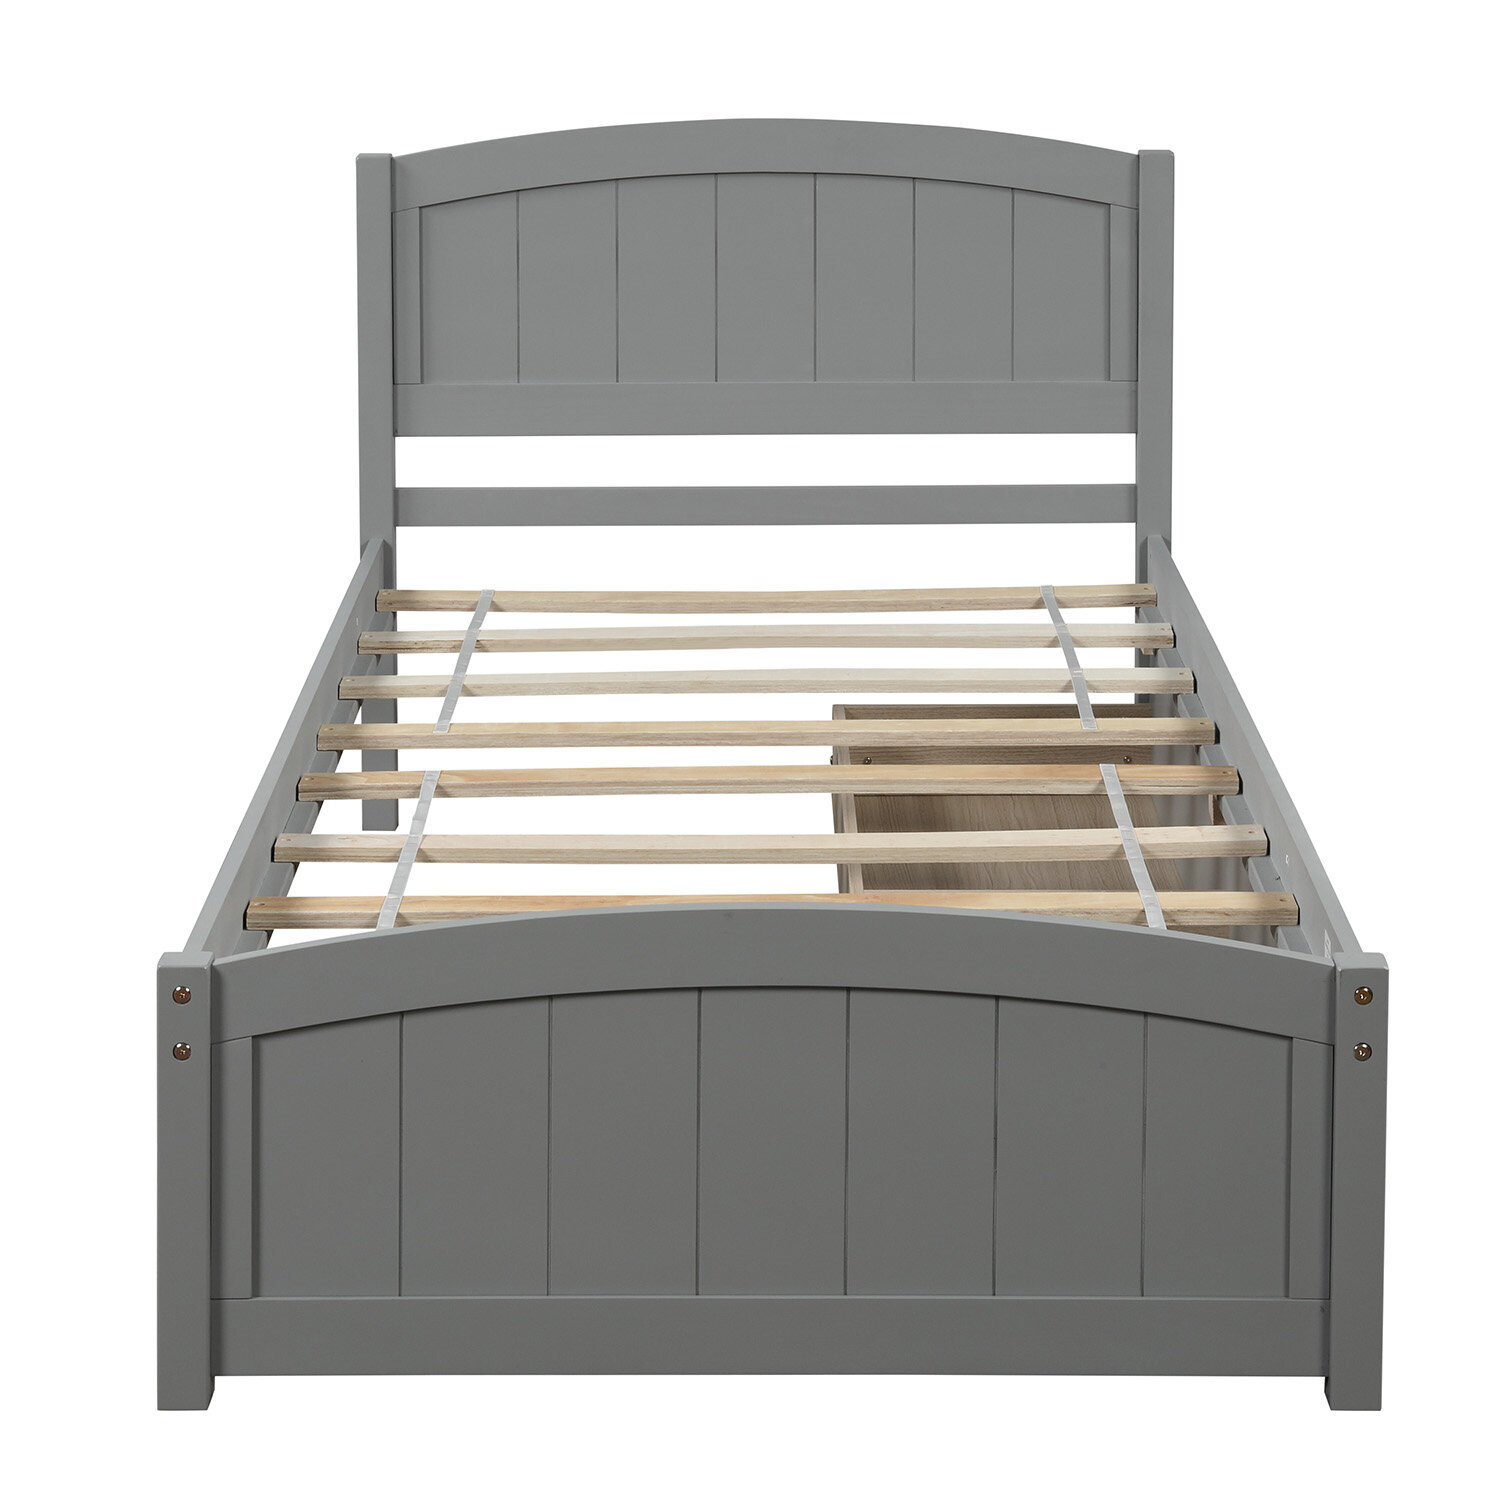 Wayfair Storage Beds You Ll Love In 2021